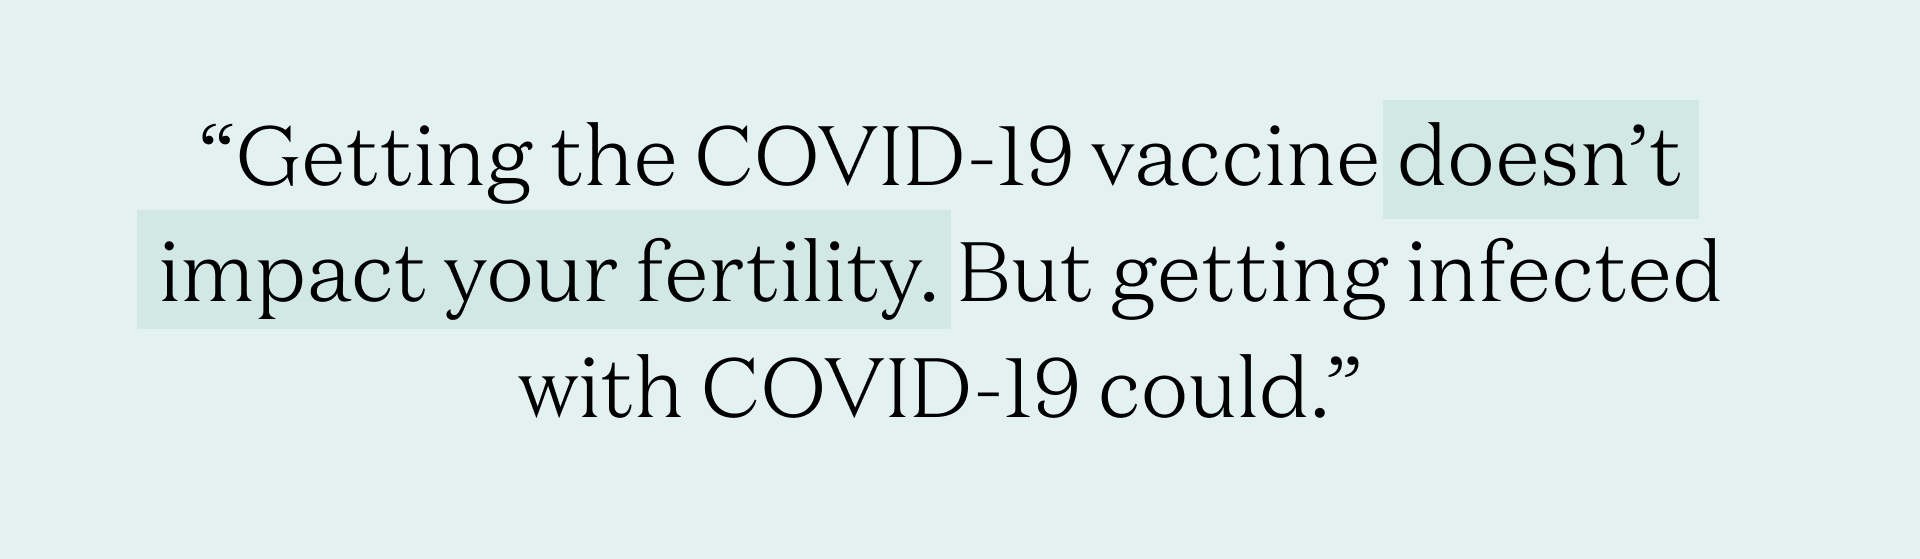 Quote says : "Getting the COVID-19 vaccine doesn’t impact your fertility. But getting infected with COVID-19 could."